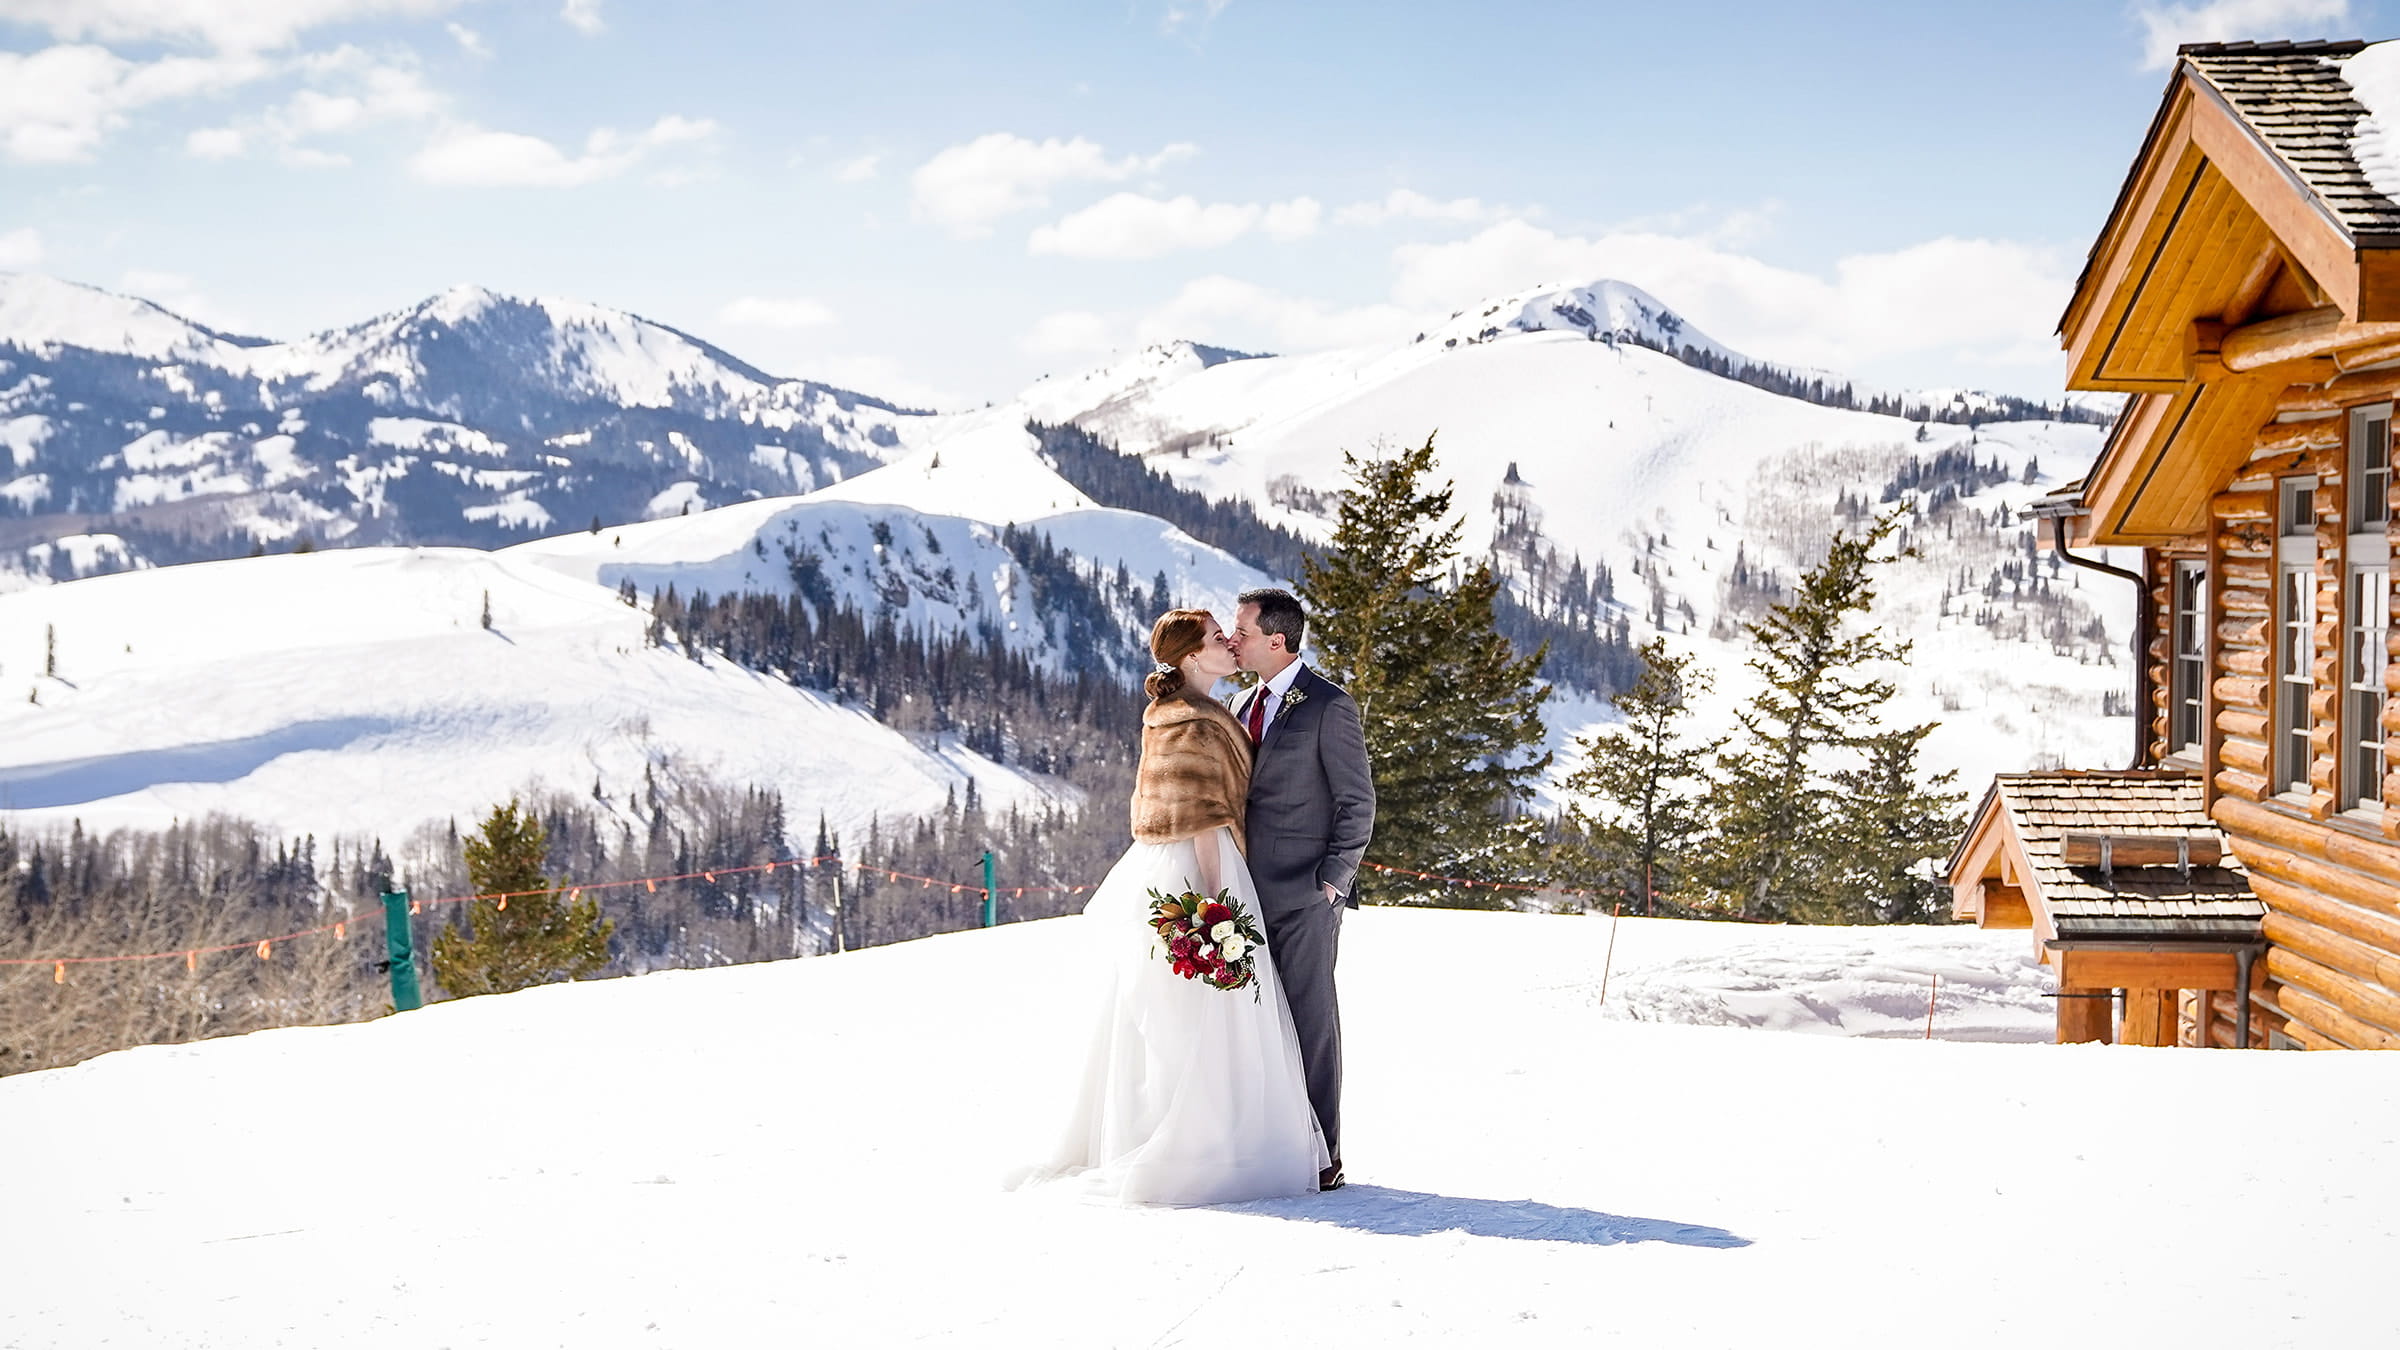 Newly weds kissing at Deer Valley.